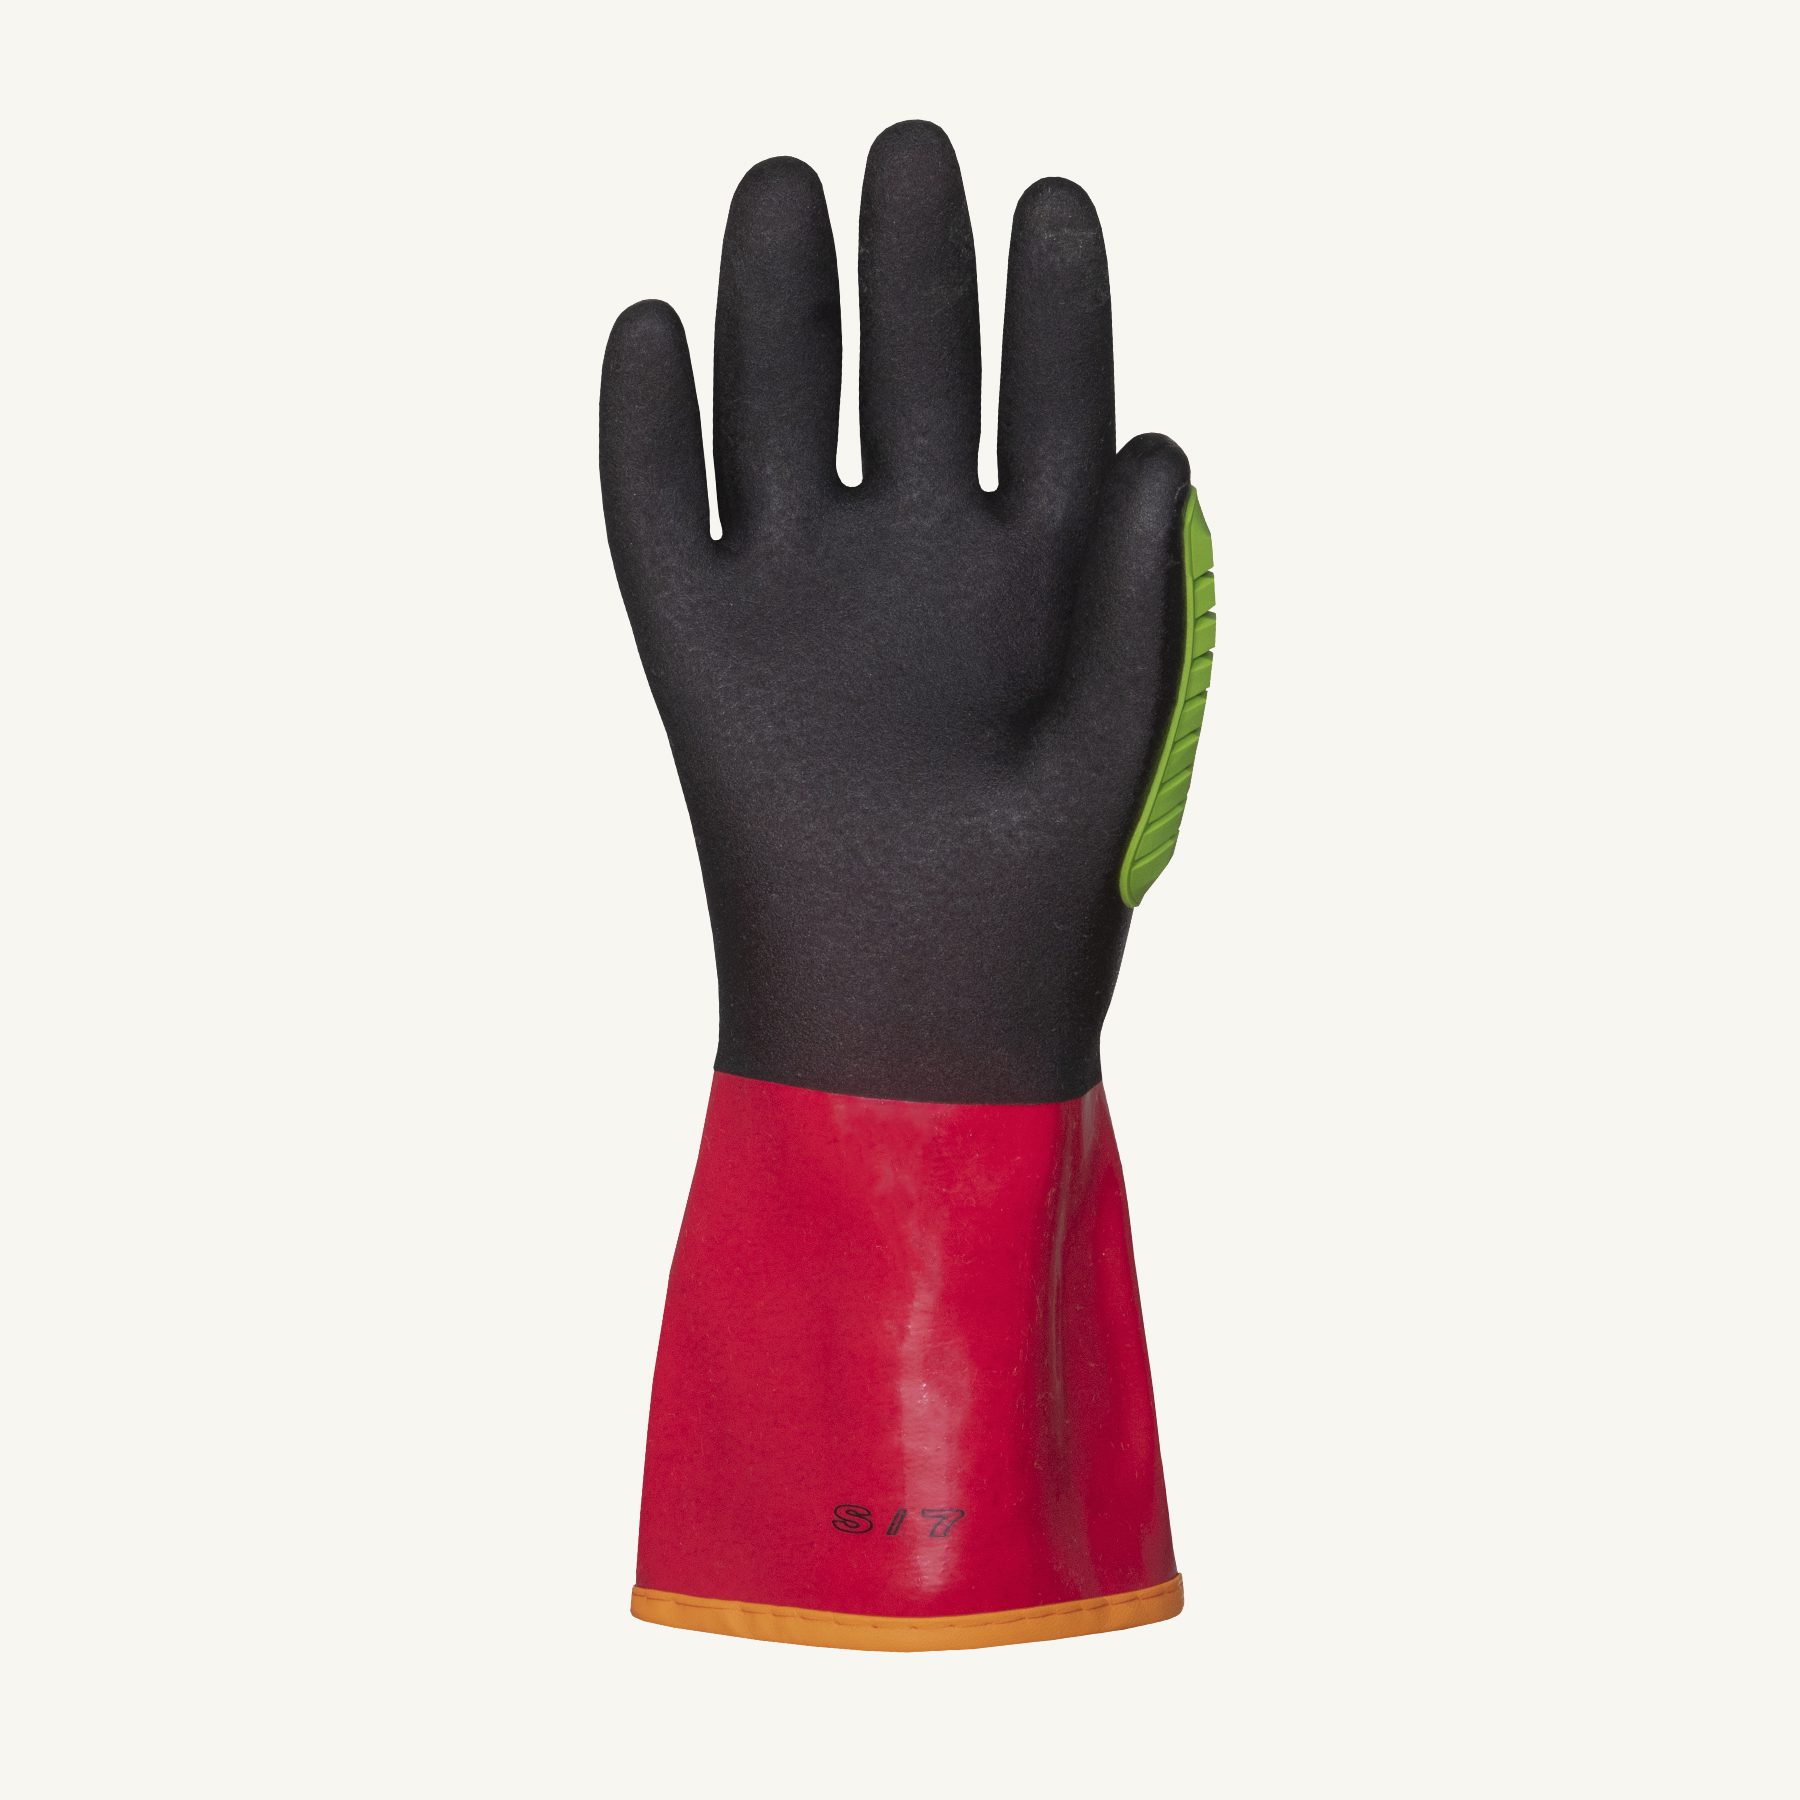 Advanced Cut-resistant Level 4 glove with Polyurethane Palm and finger  Coating